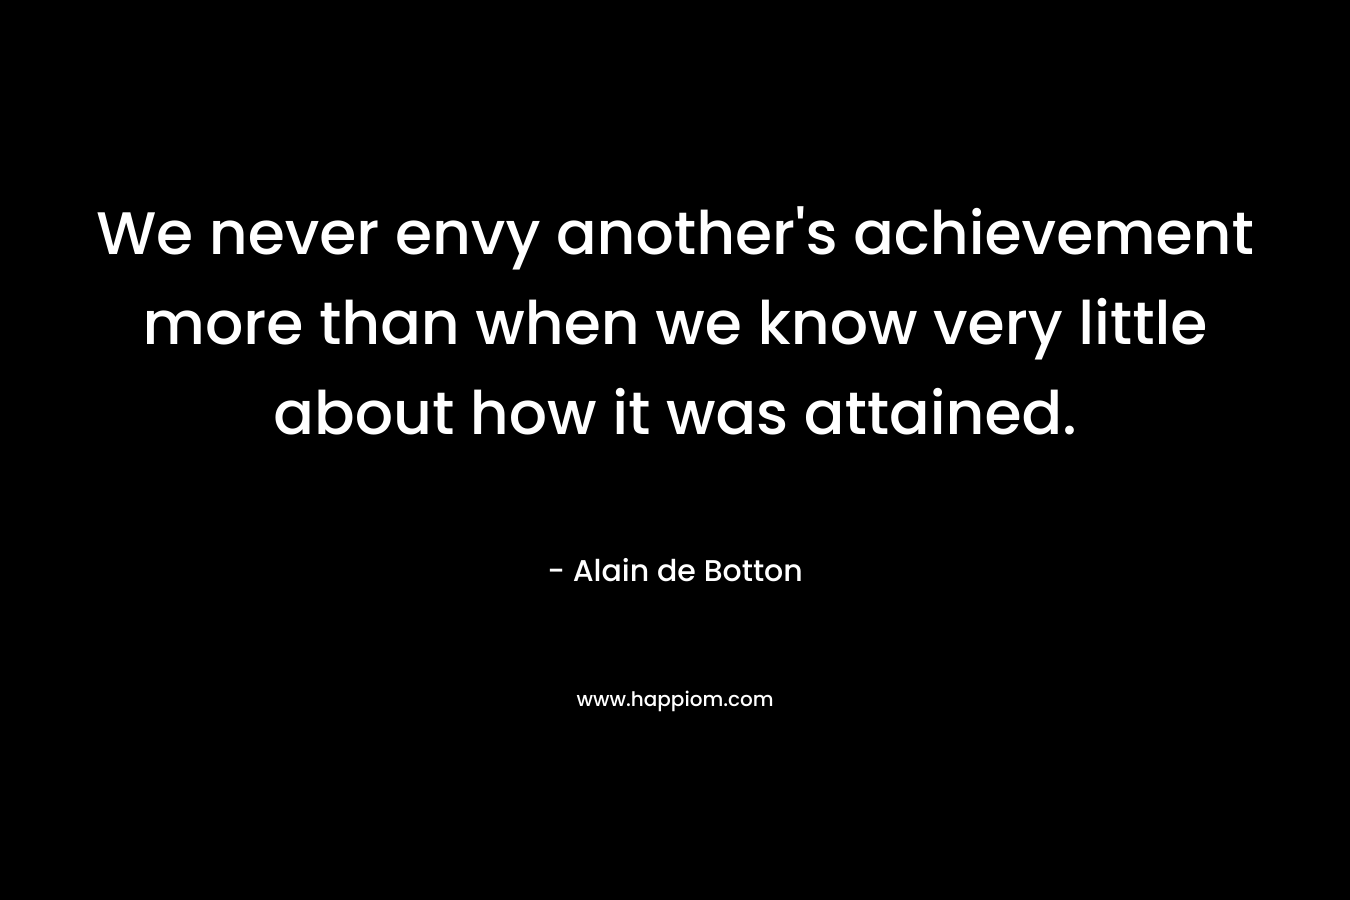 We never envy another’s achievement more than when we know very little about how it was attained. – Alain de Botton